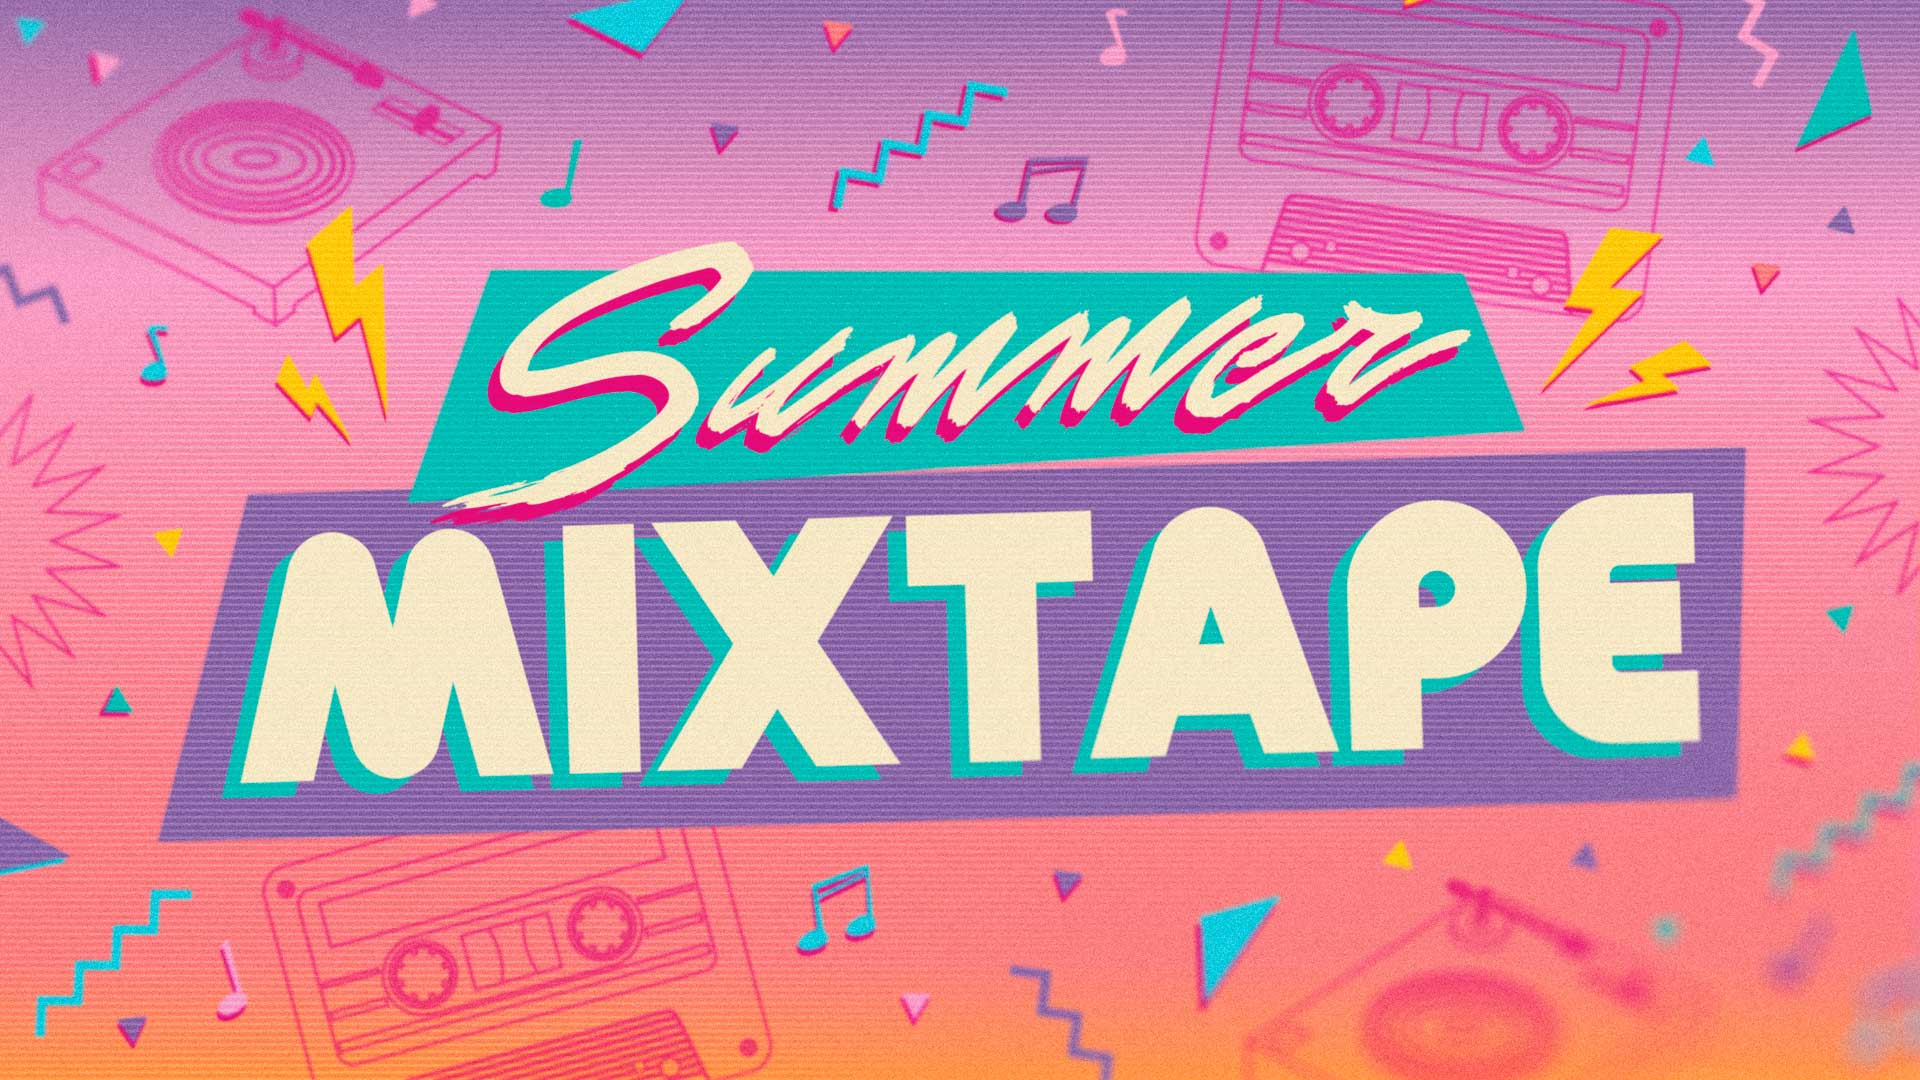 SummerMixTape - What’s on your summer reading list? Dive into a few one-chapter books in the Bible to learn some new truths about faith and following Jesus.